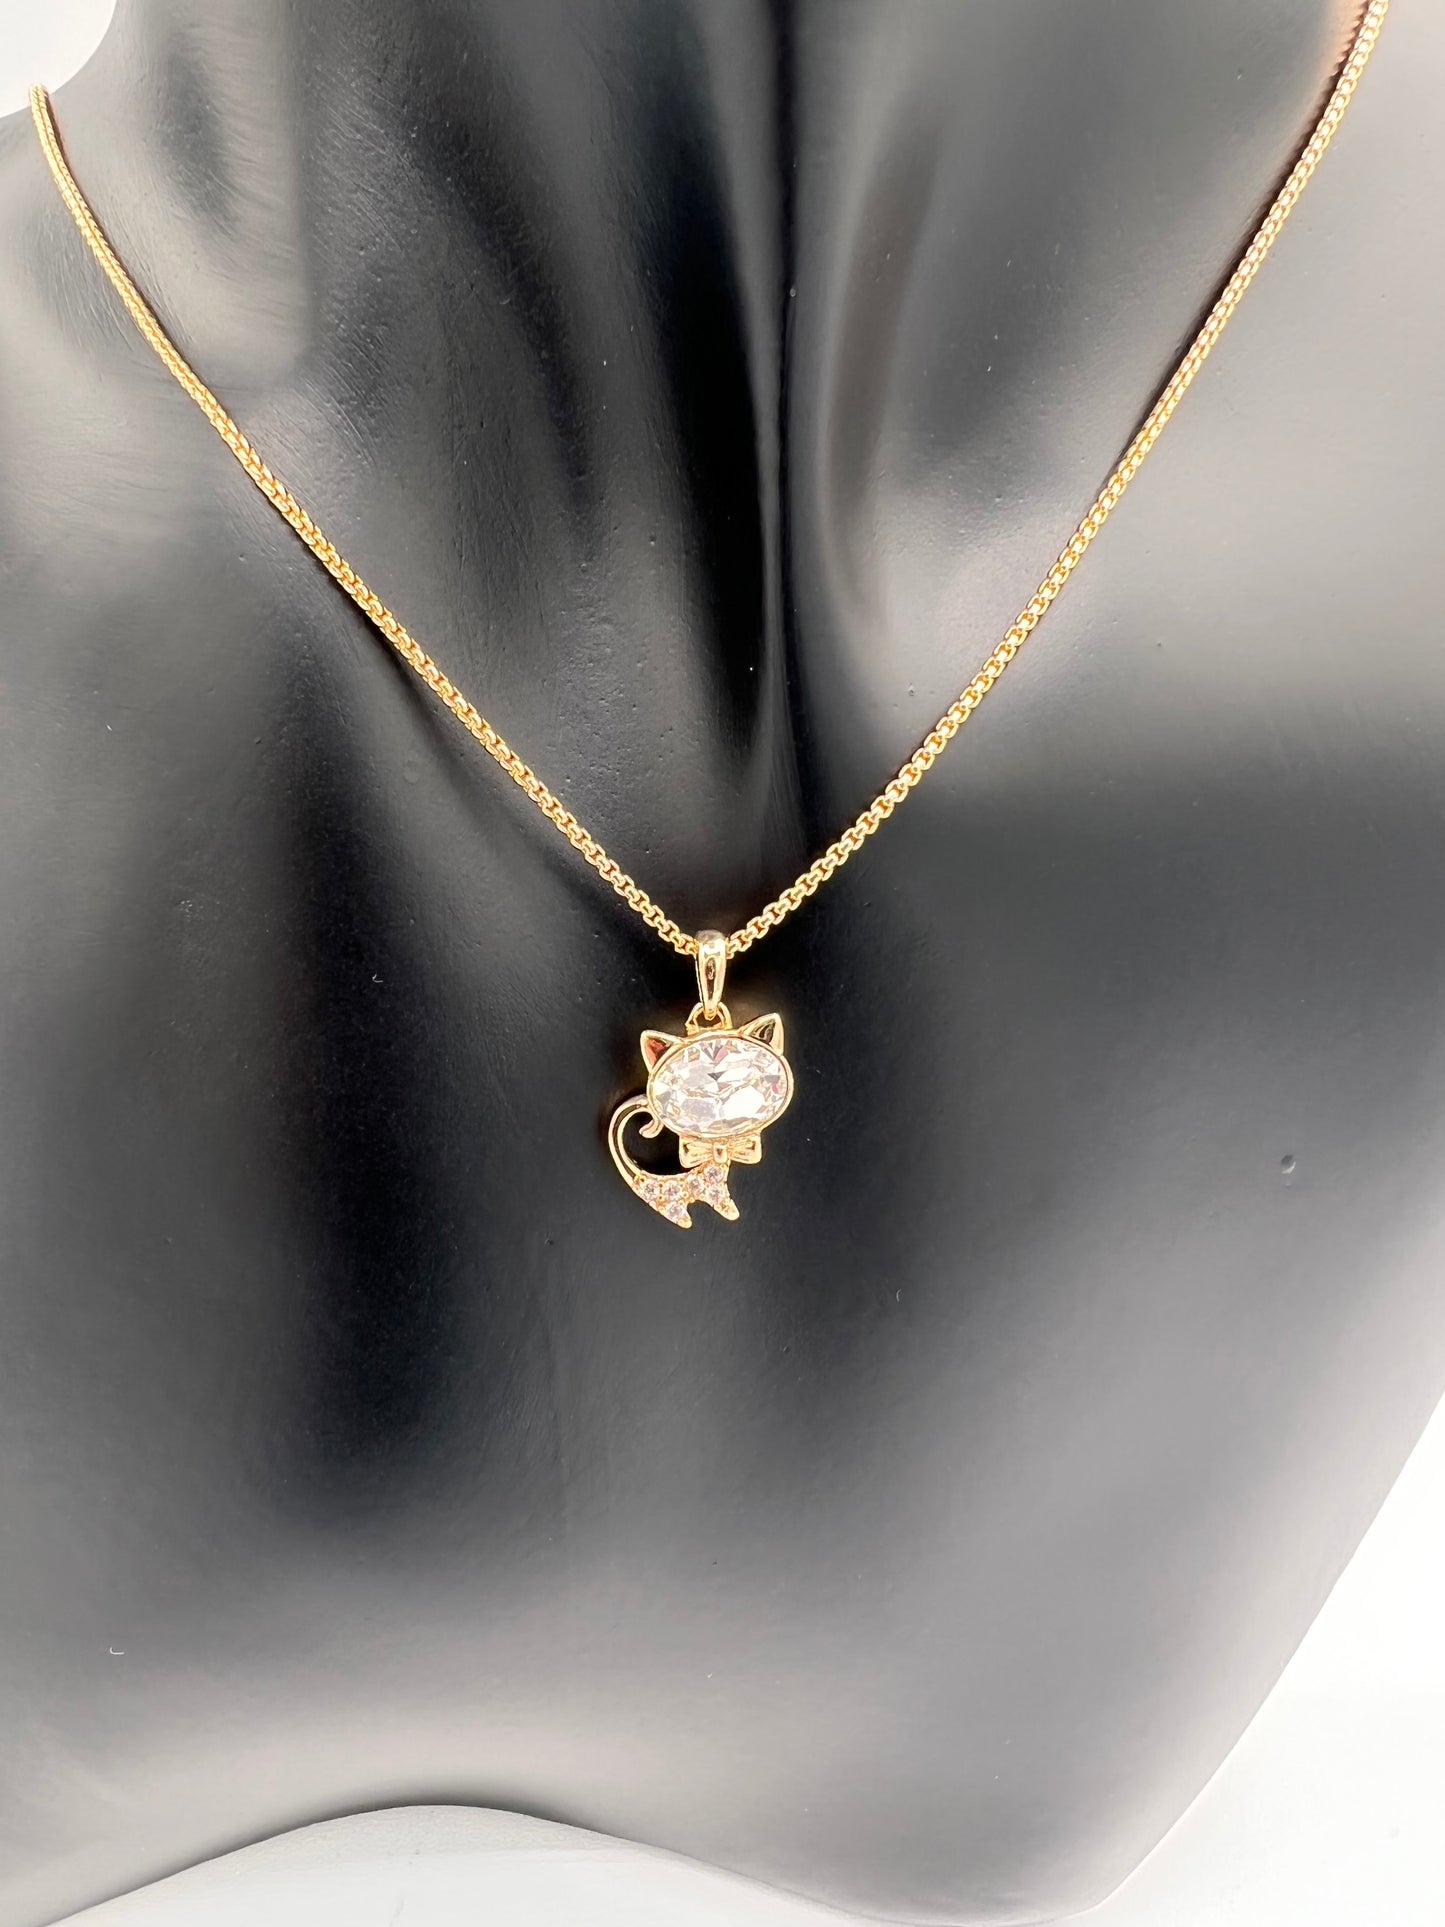 Purrfect Elegance: Cat Pendant Necklace Gold Plated – Whimsical Charm in Every Gilded Detail for Feline Enthusiasts